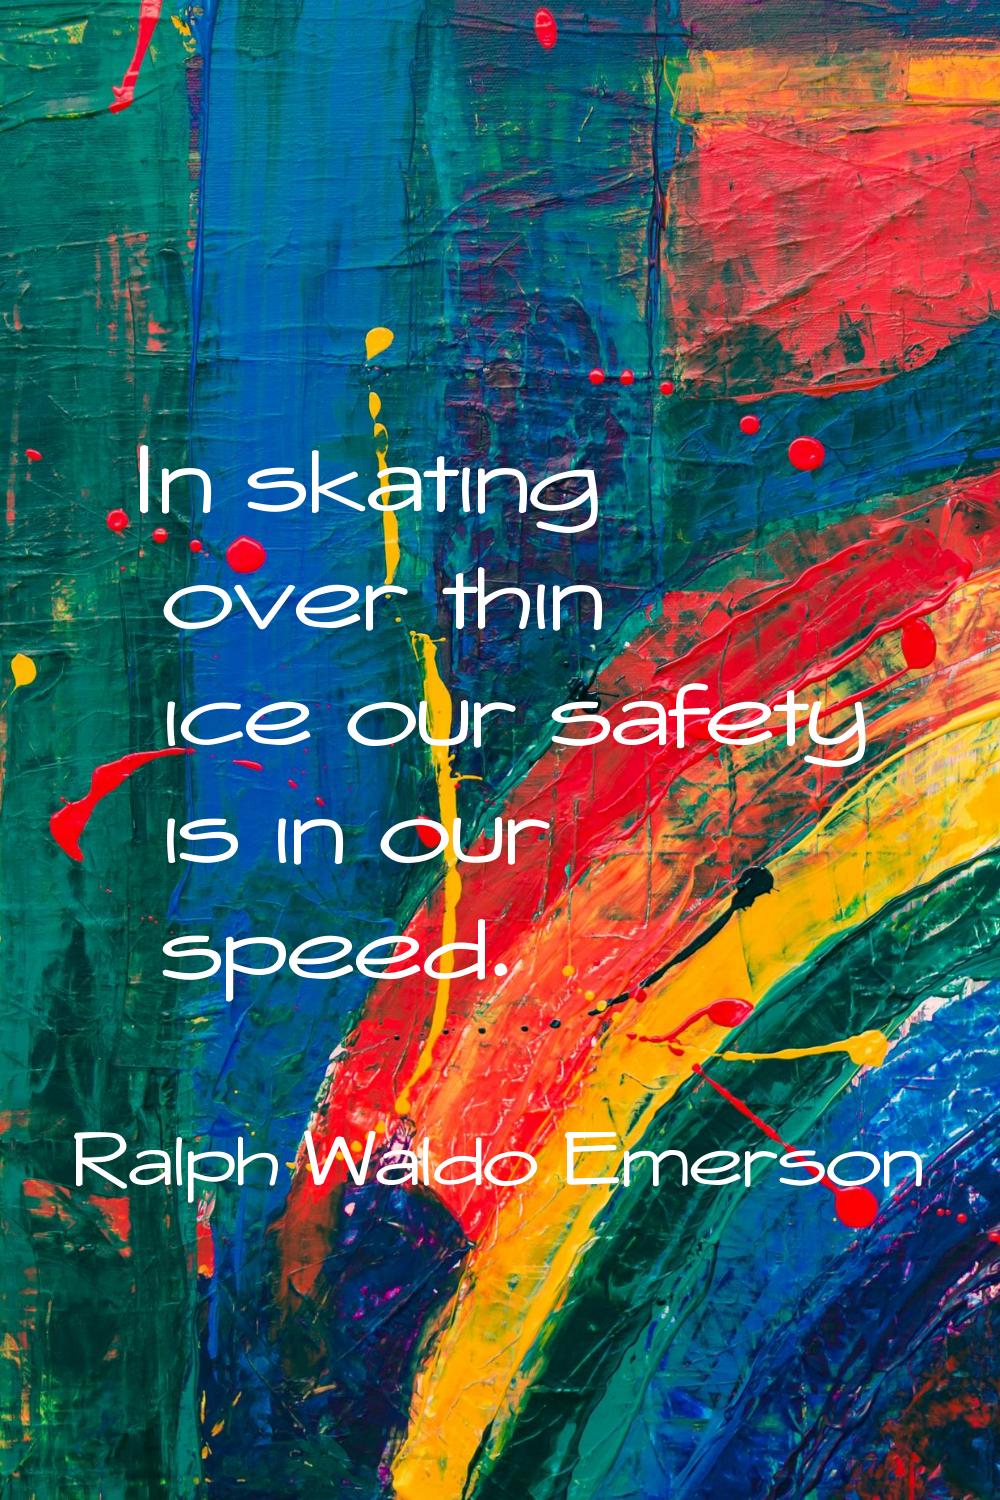 In skating over thin ice our safety is in our speed.